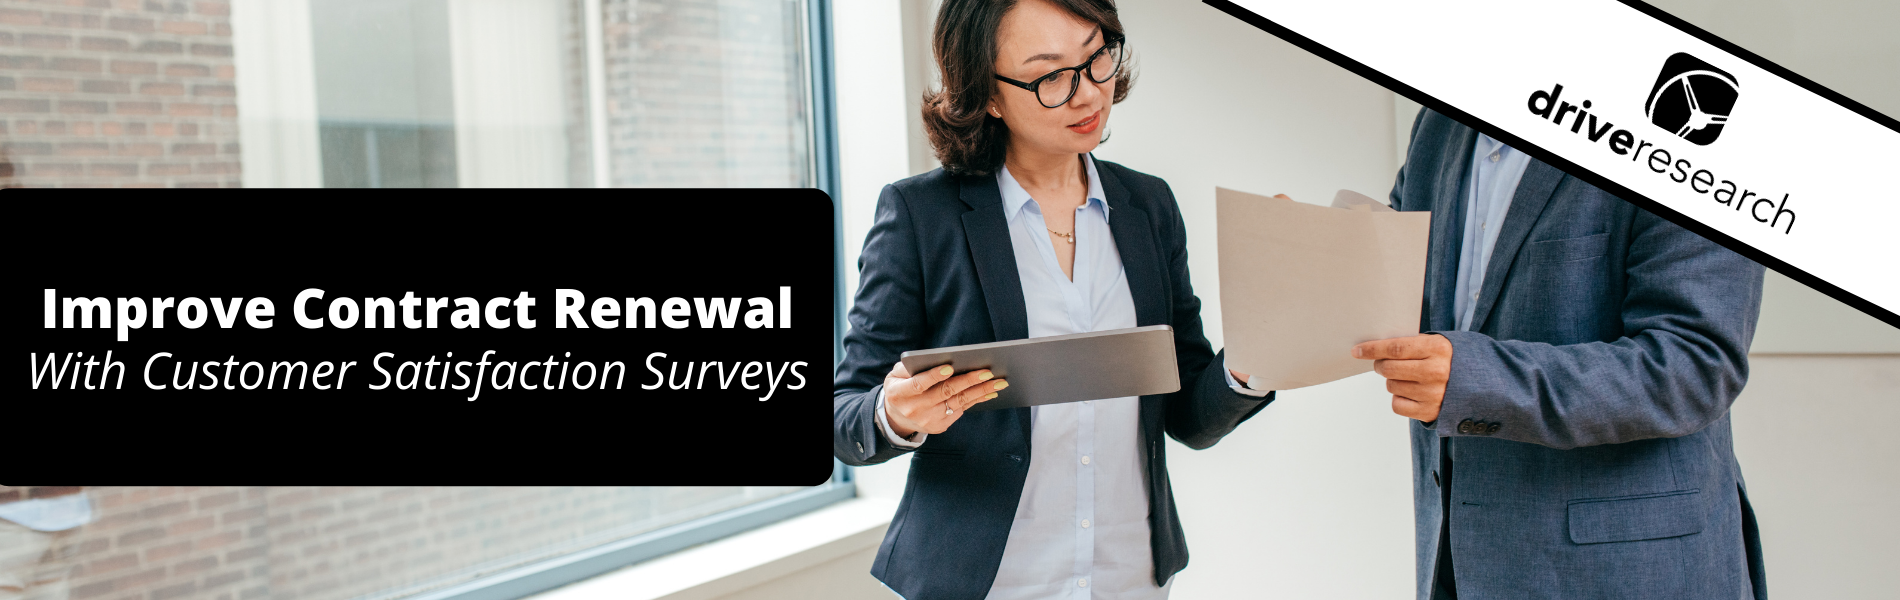 How to Improve Contract Renewal with Customer Satisfaction Surveys